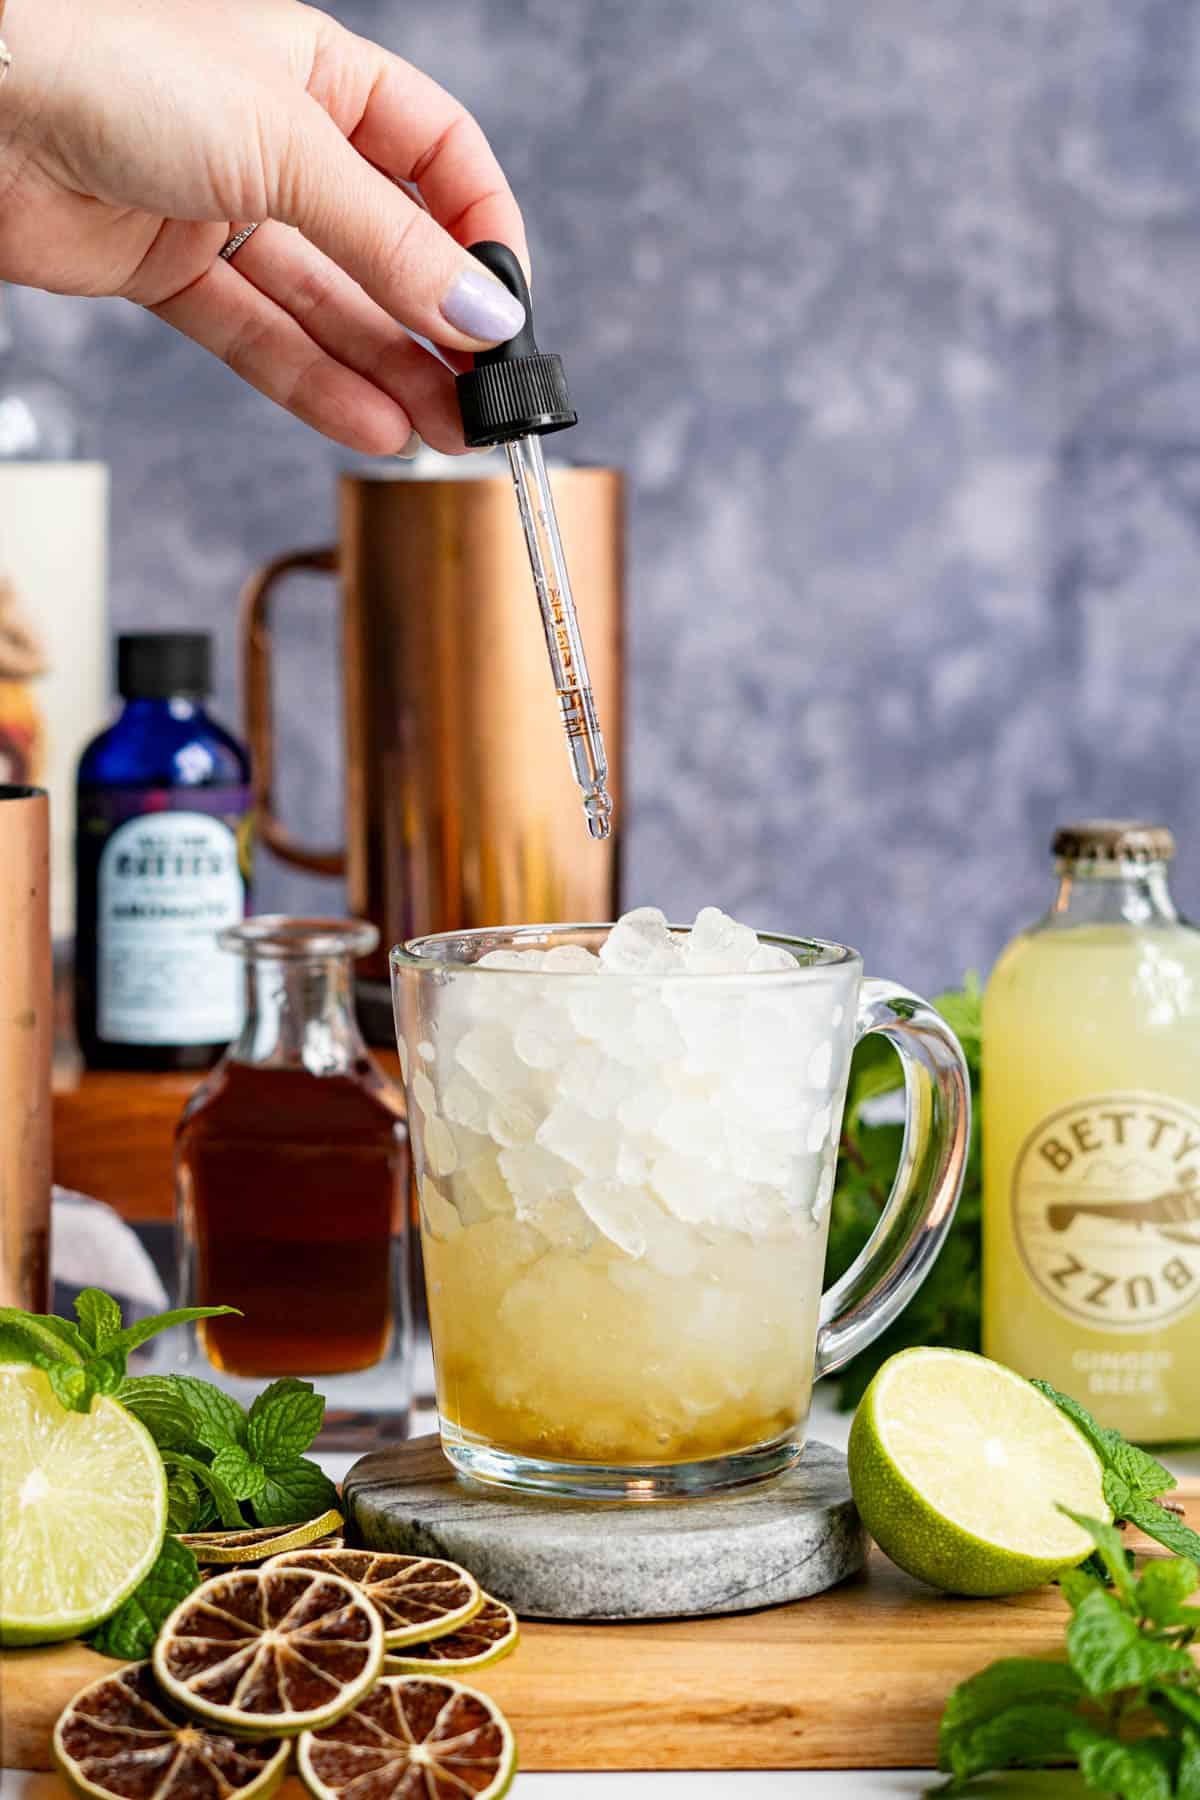 A hand from out of frame is dropping a saline solution into a virgin moscow mule cocktail.